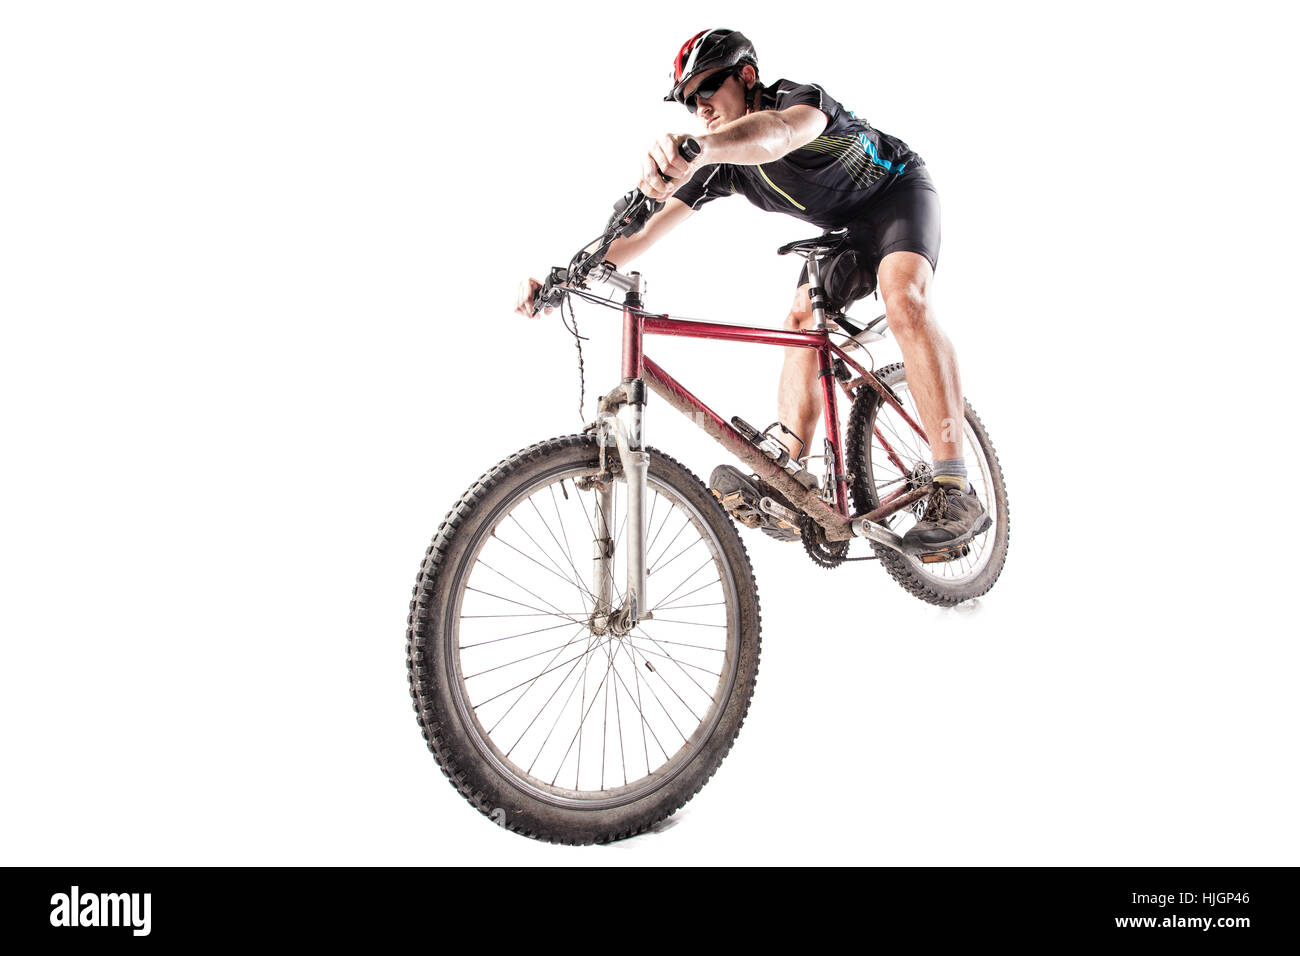 Male bicyclist riding a very dirty mountain bike downhill style Stock Photo